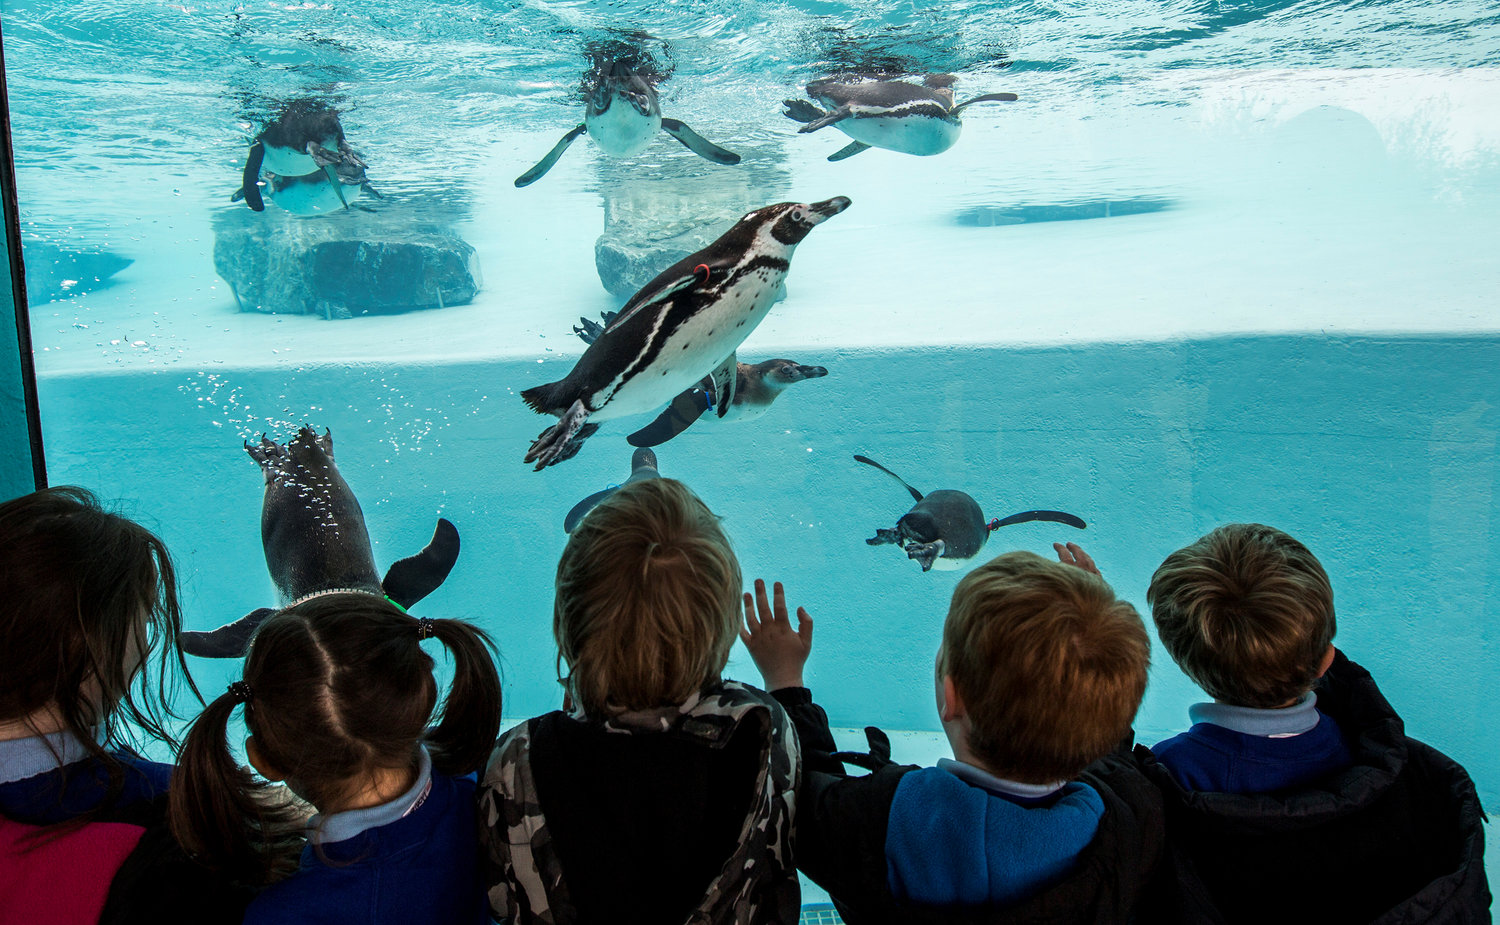 Penguin viewing on a school trip